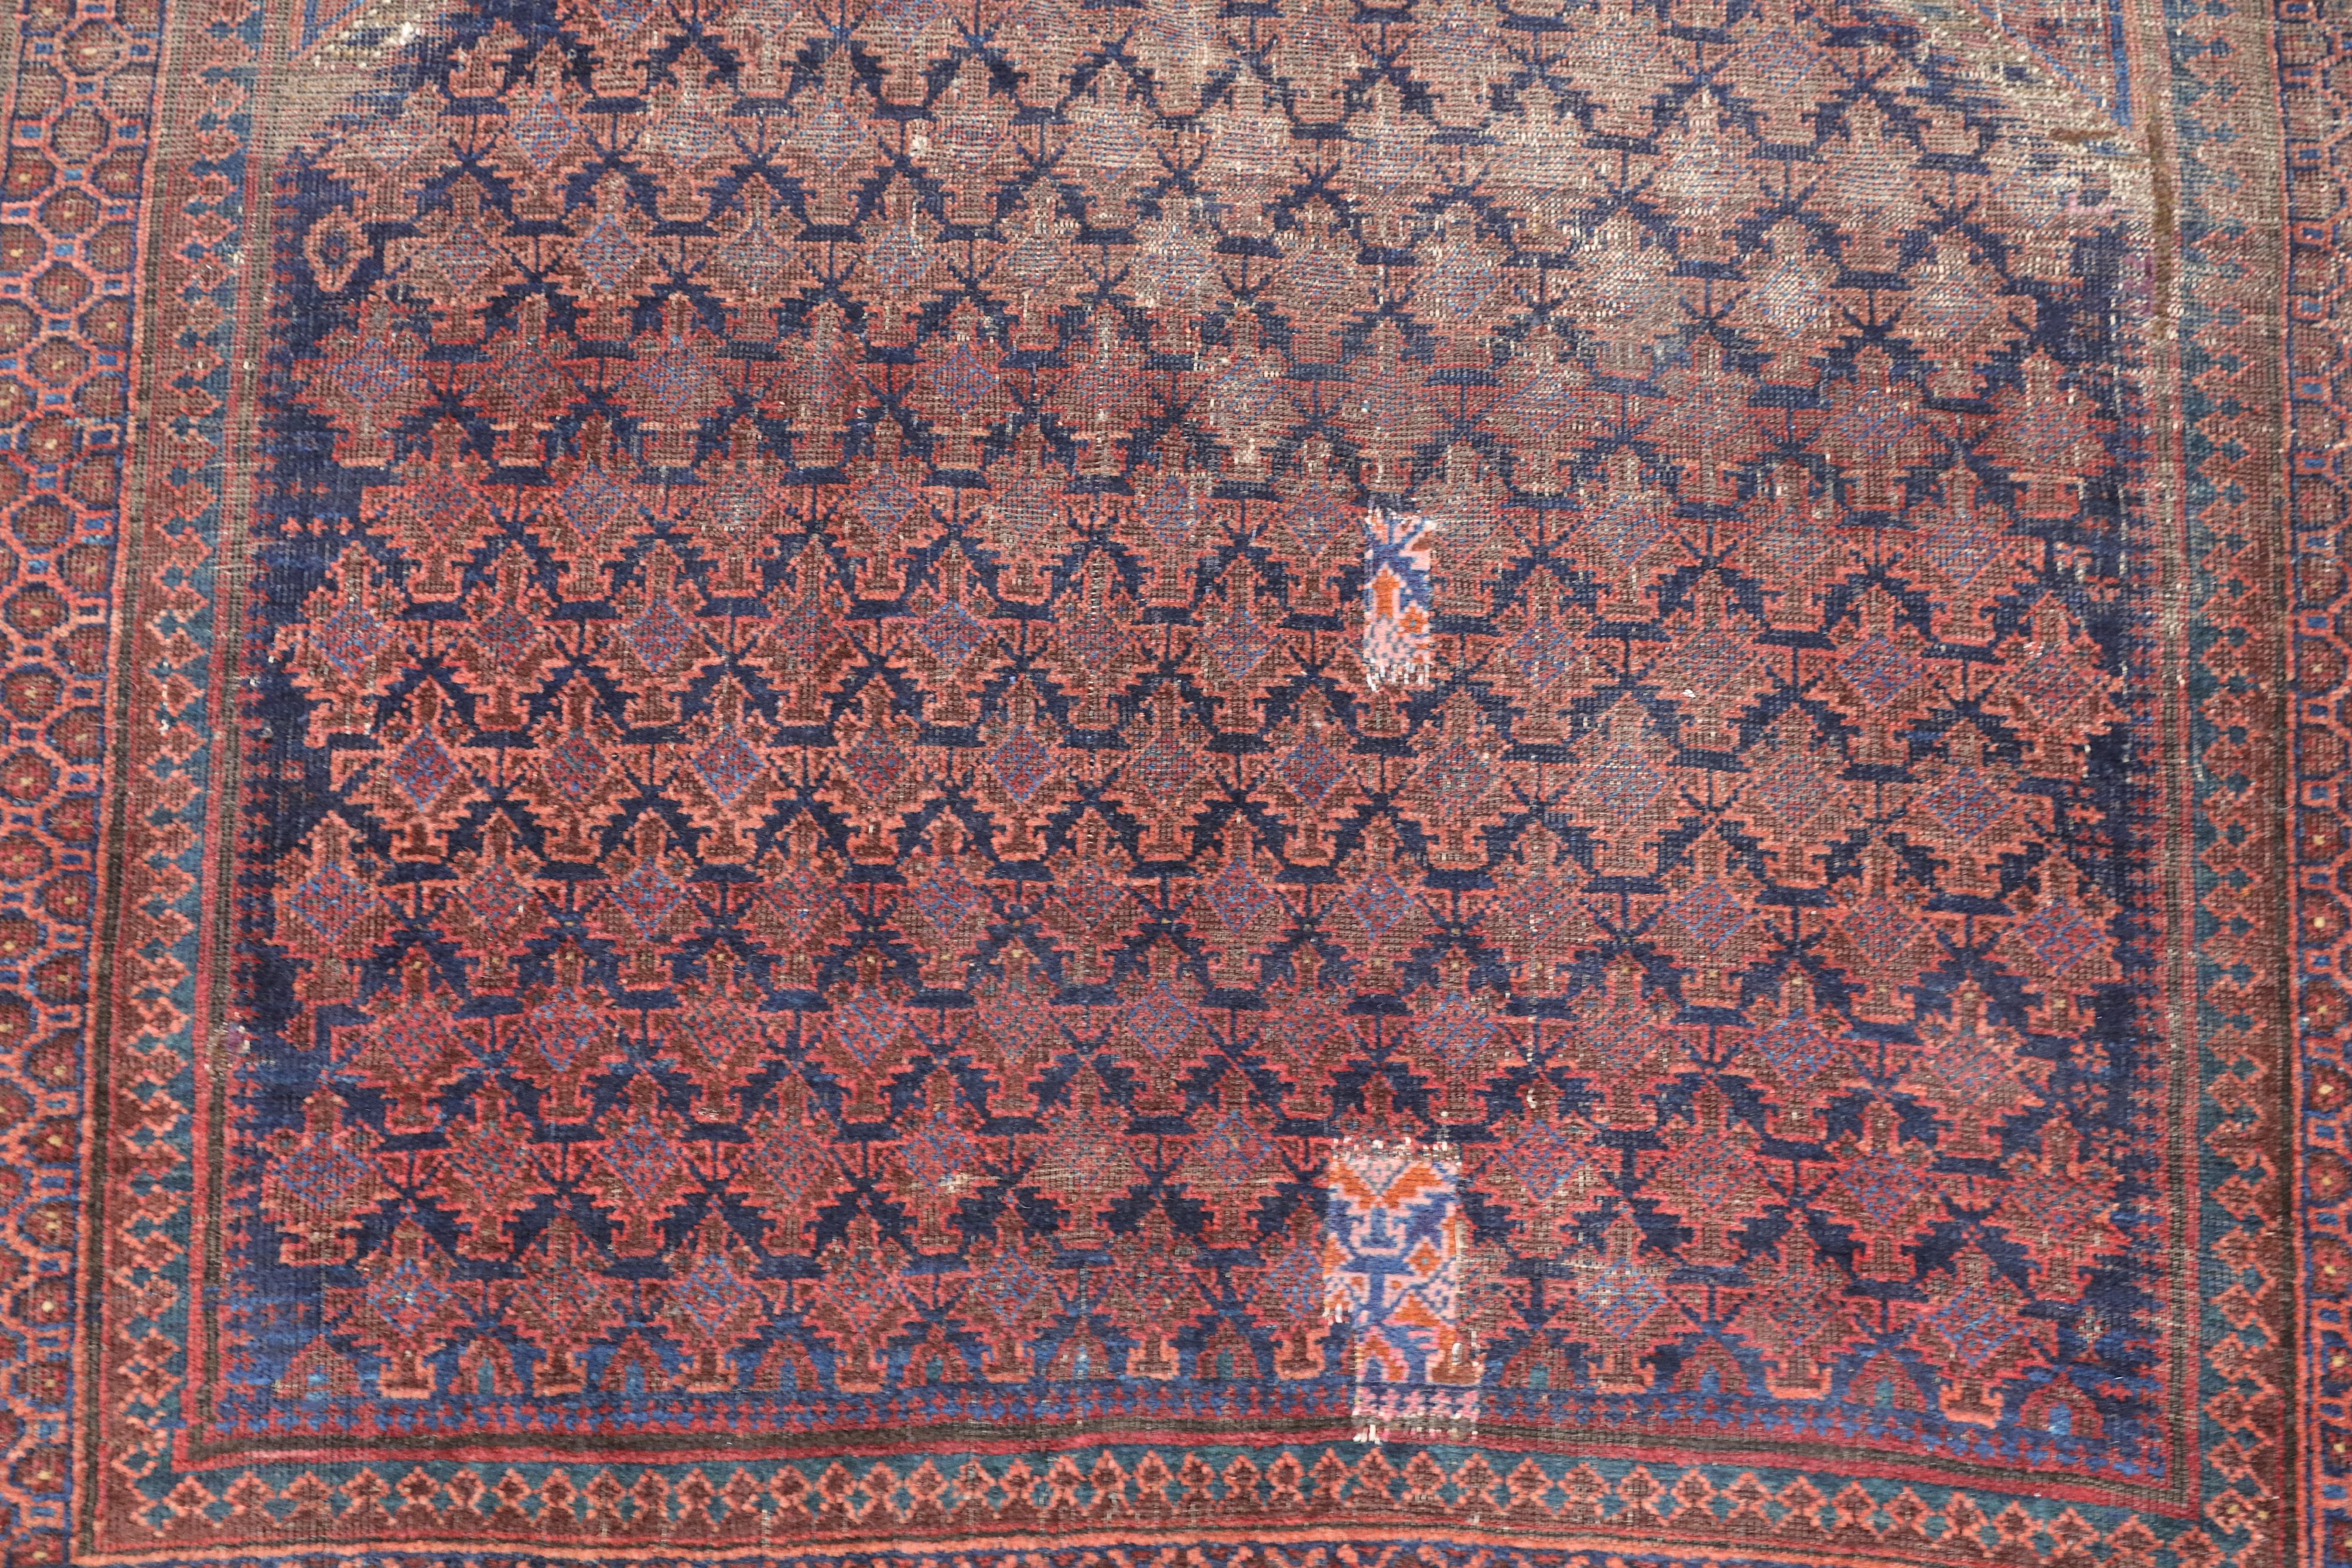 AN ANTIQUE BALOUCH PRAYER RUG, NORTH-EAST PERSIA - Image 3 of 6